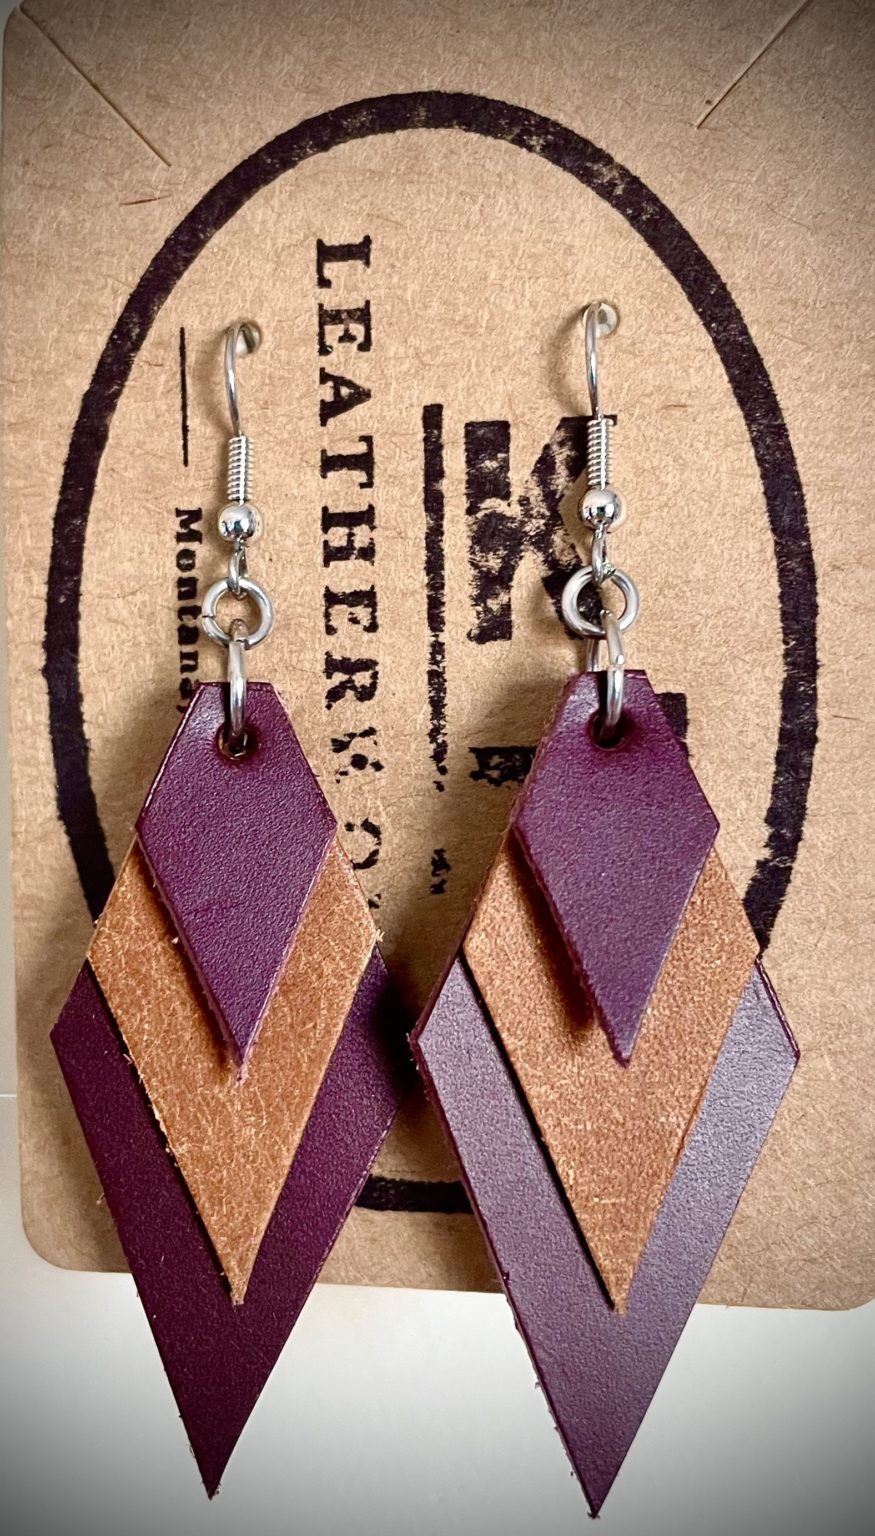 A pair of leather earrings Kelsey handcrafted show a unique diamond shape made from different types of leather.